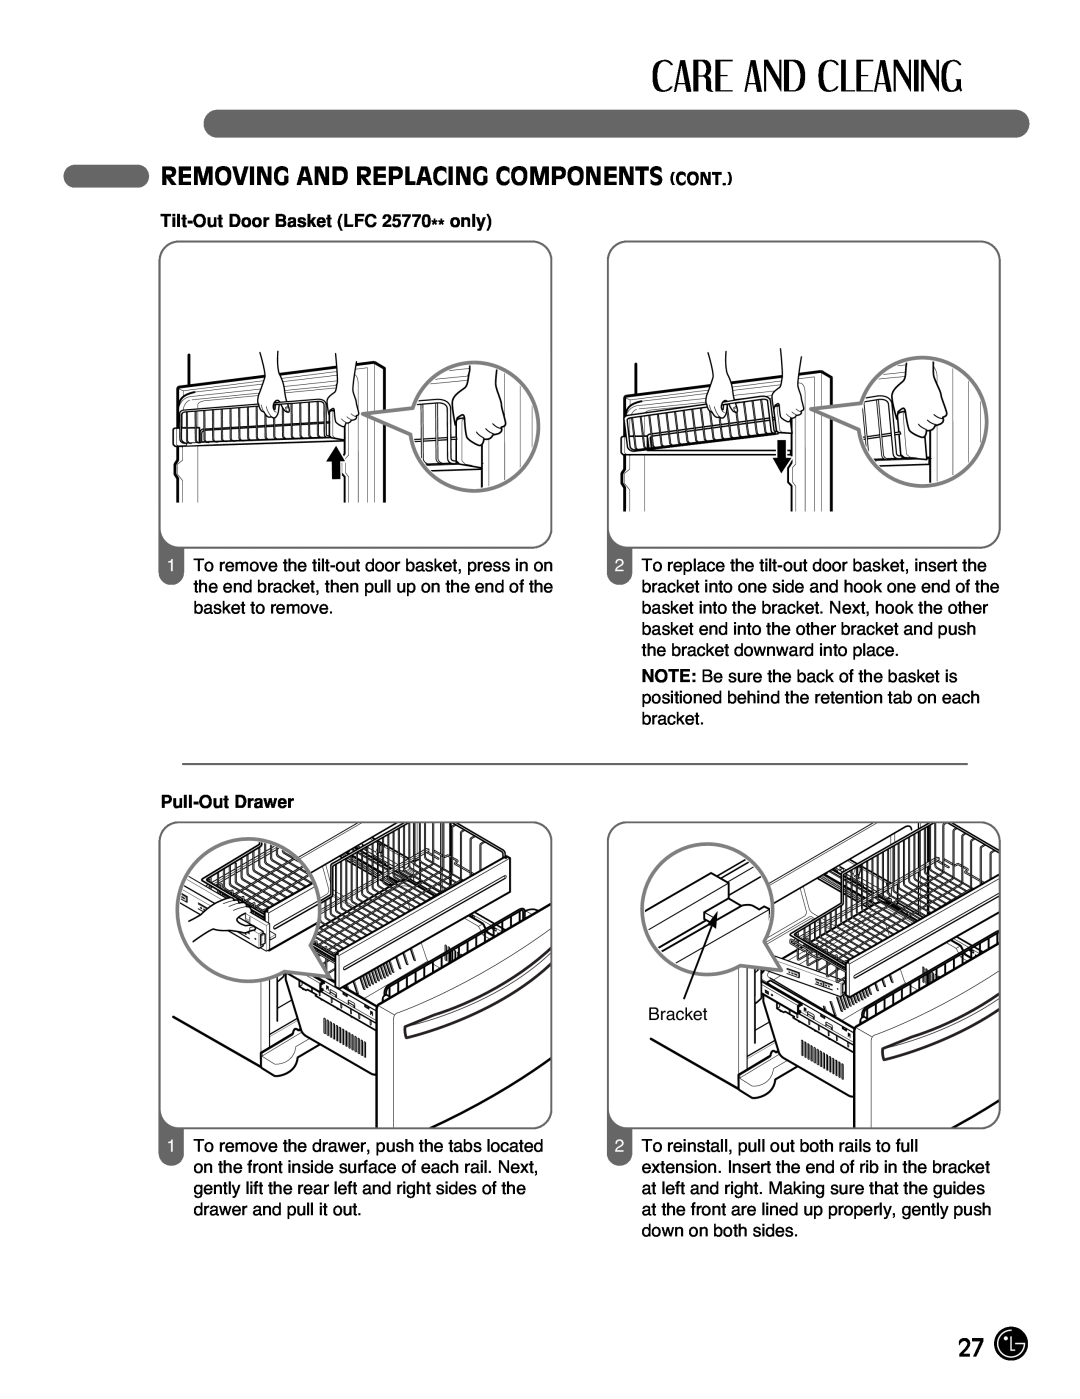 LG Electronics LFC25770 manual Removing And Replacing Components Cont, Tilt-OutDoor Basket LFC 25770** only, Pull-OutDrawer 